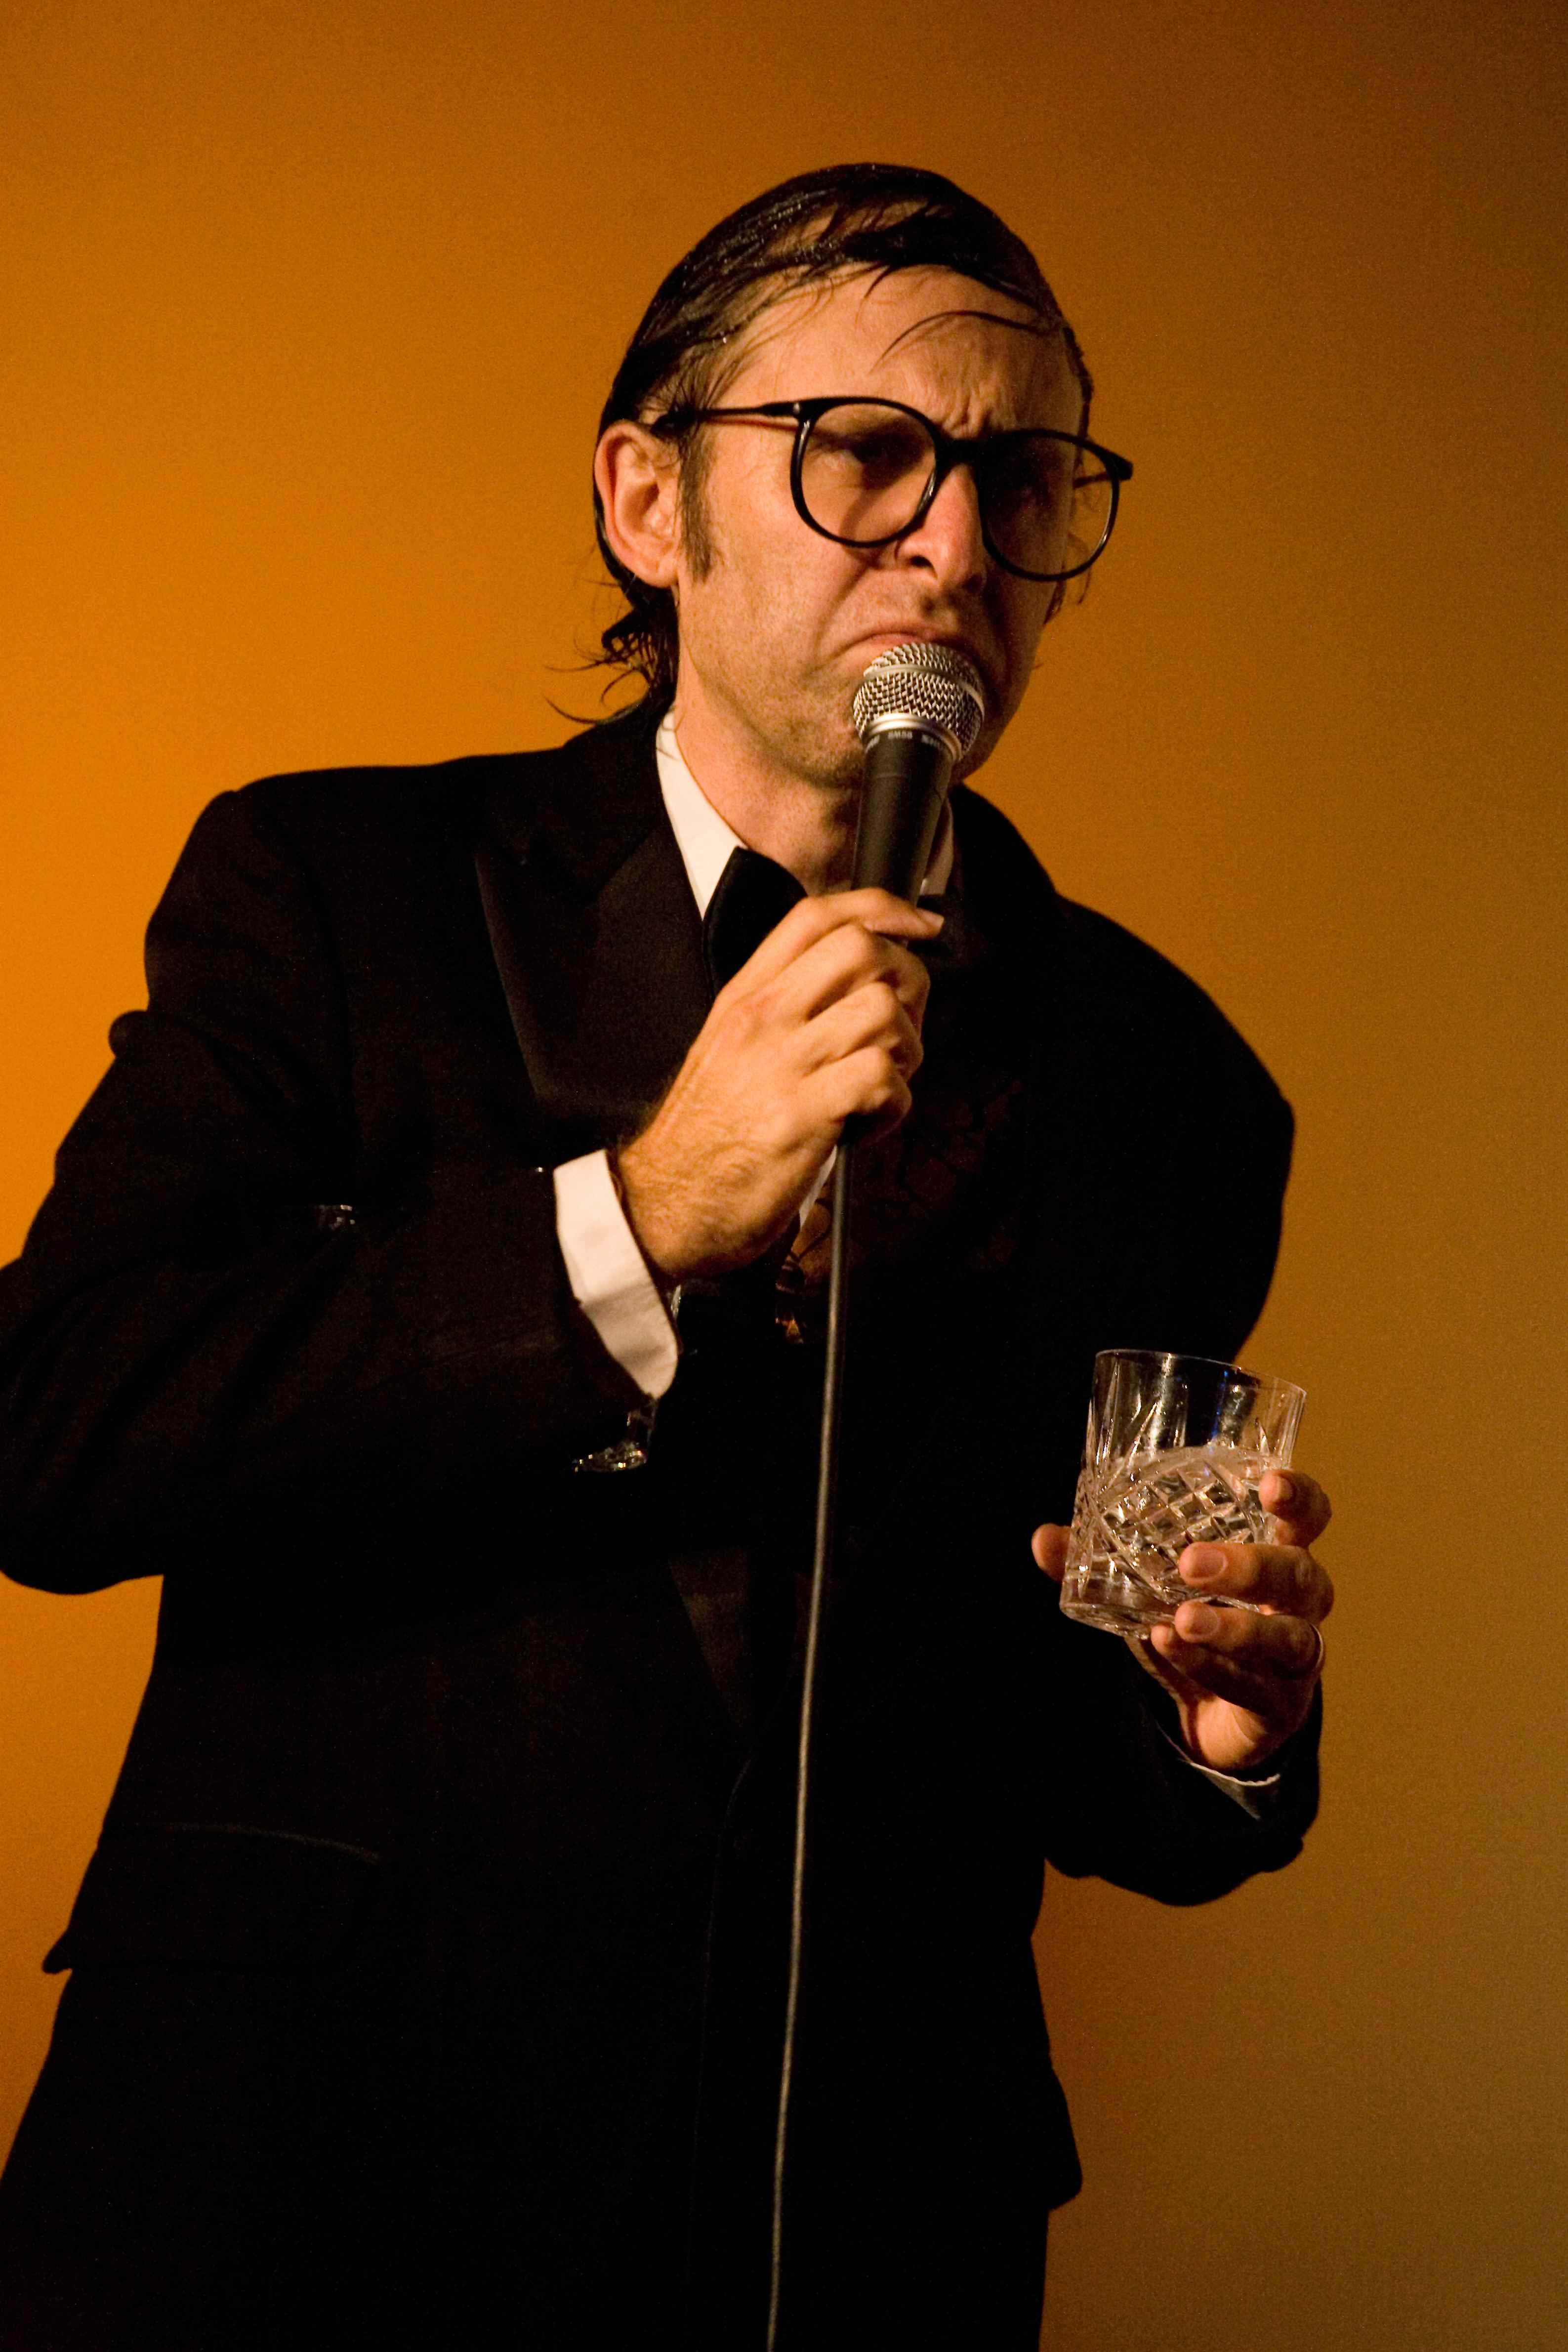 Gregg Turkington as Neil Hamburger performing at the Hollywood Forever Cemetery in Los Angeles, California.